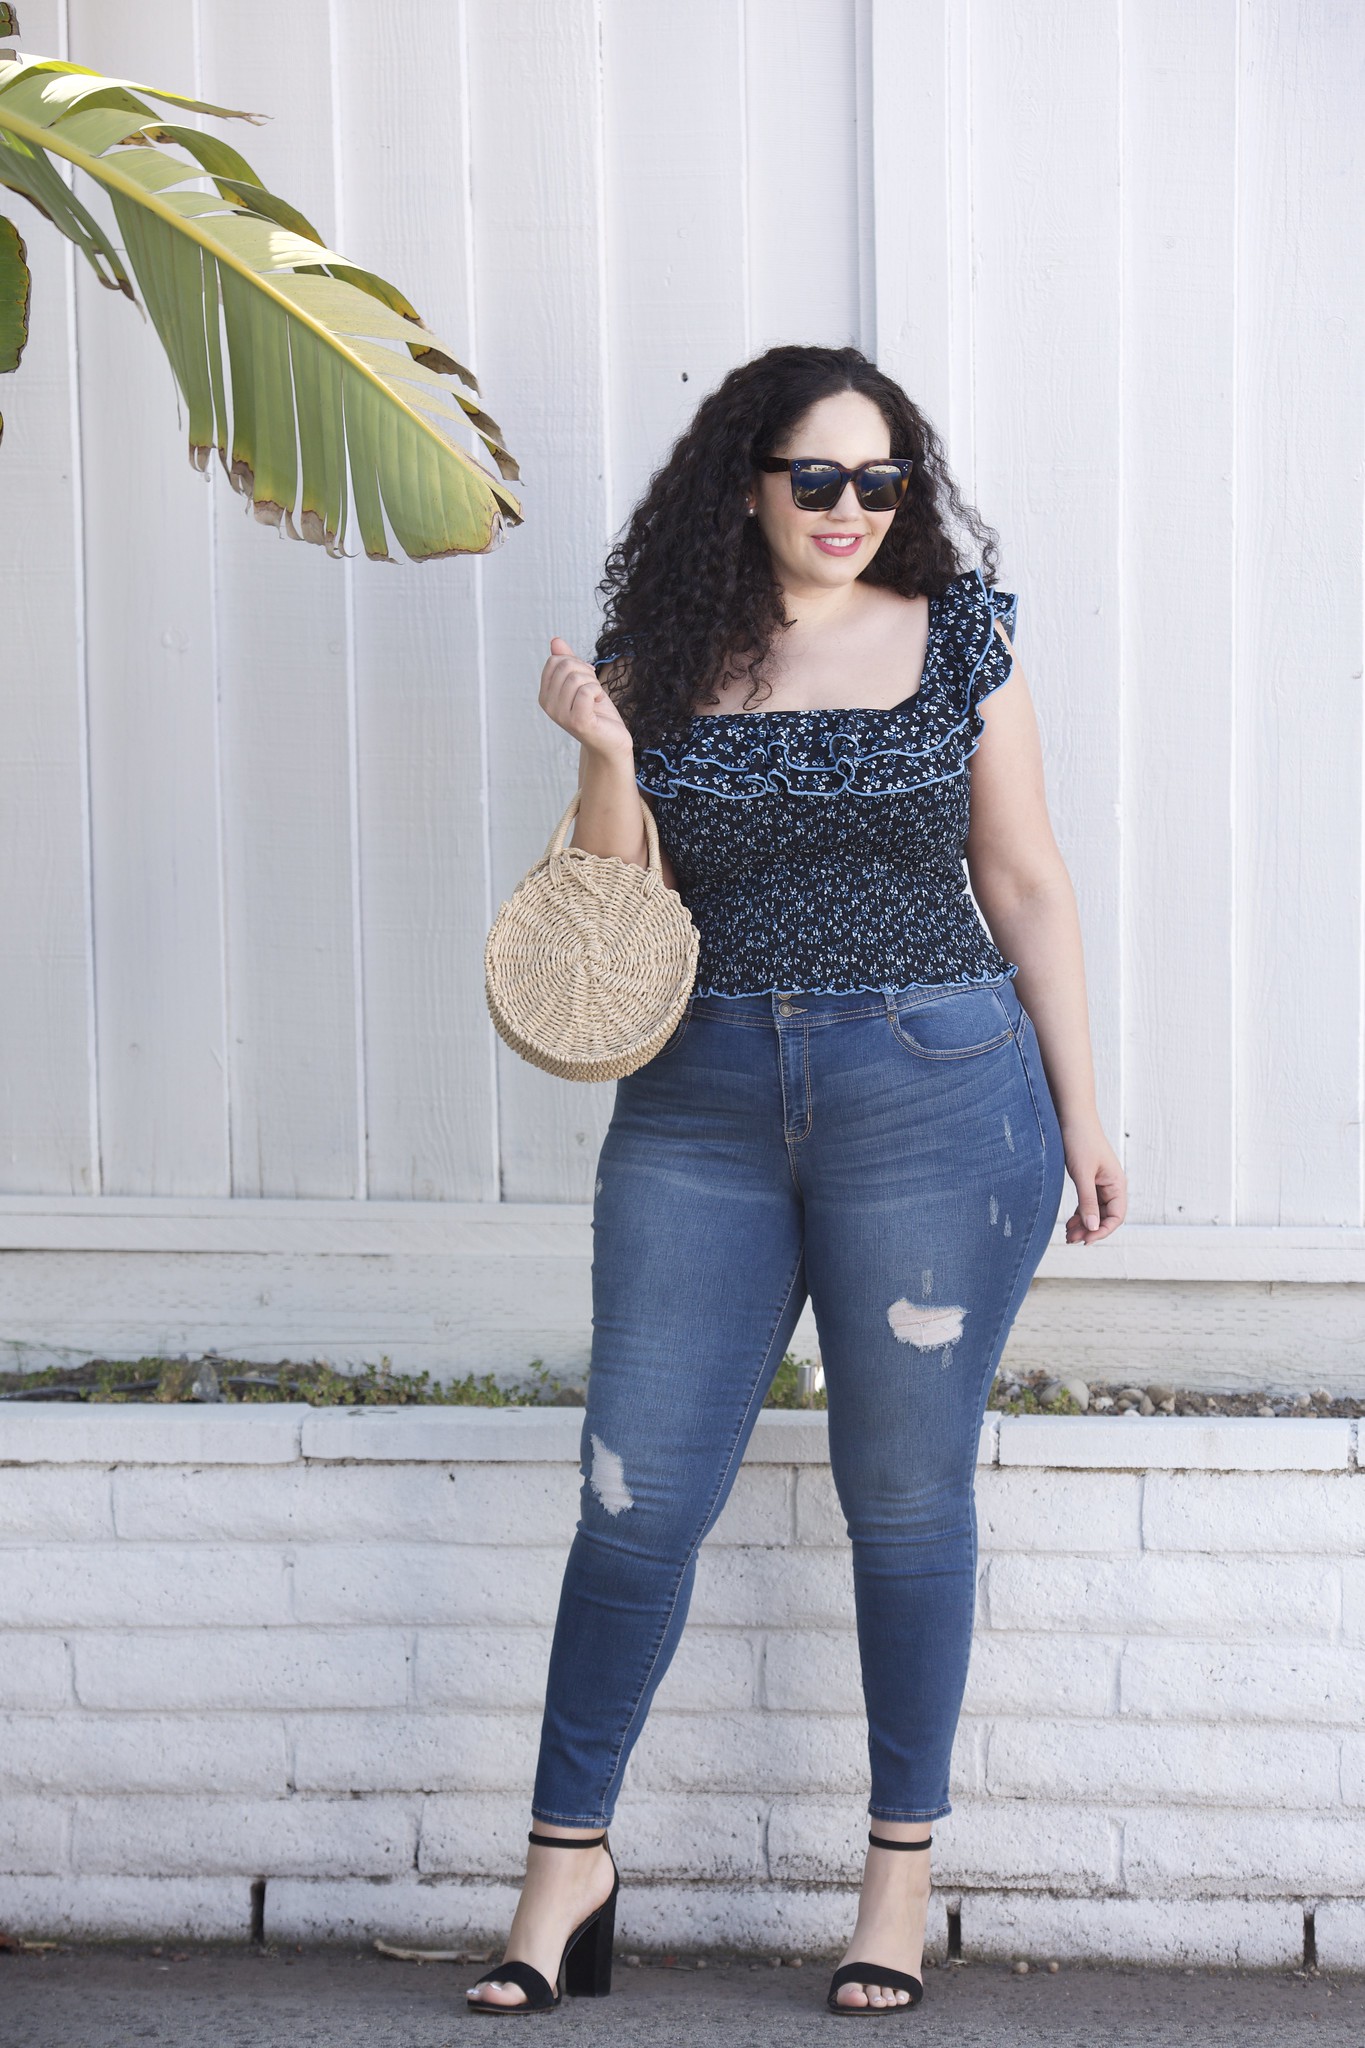 These Jeans were Made for Curves | Girl With Curves